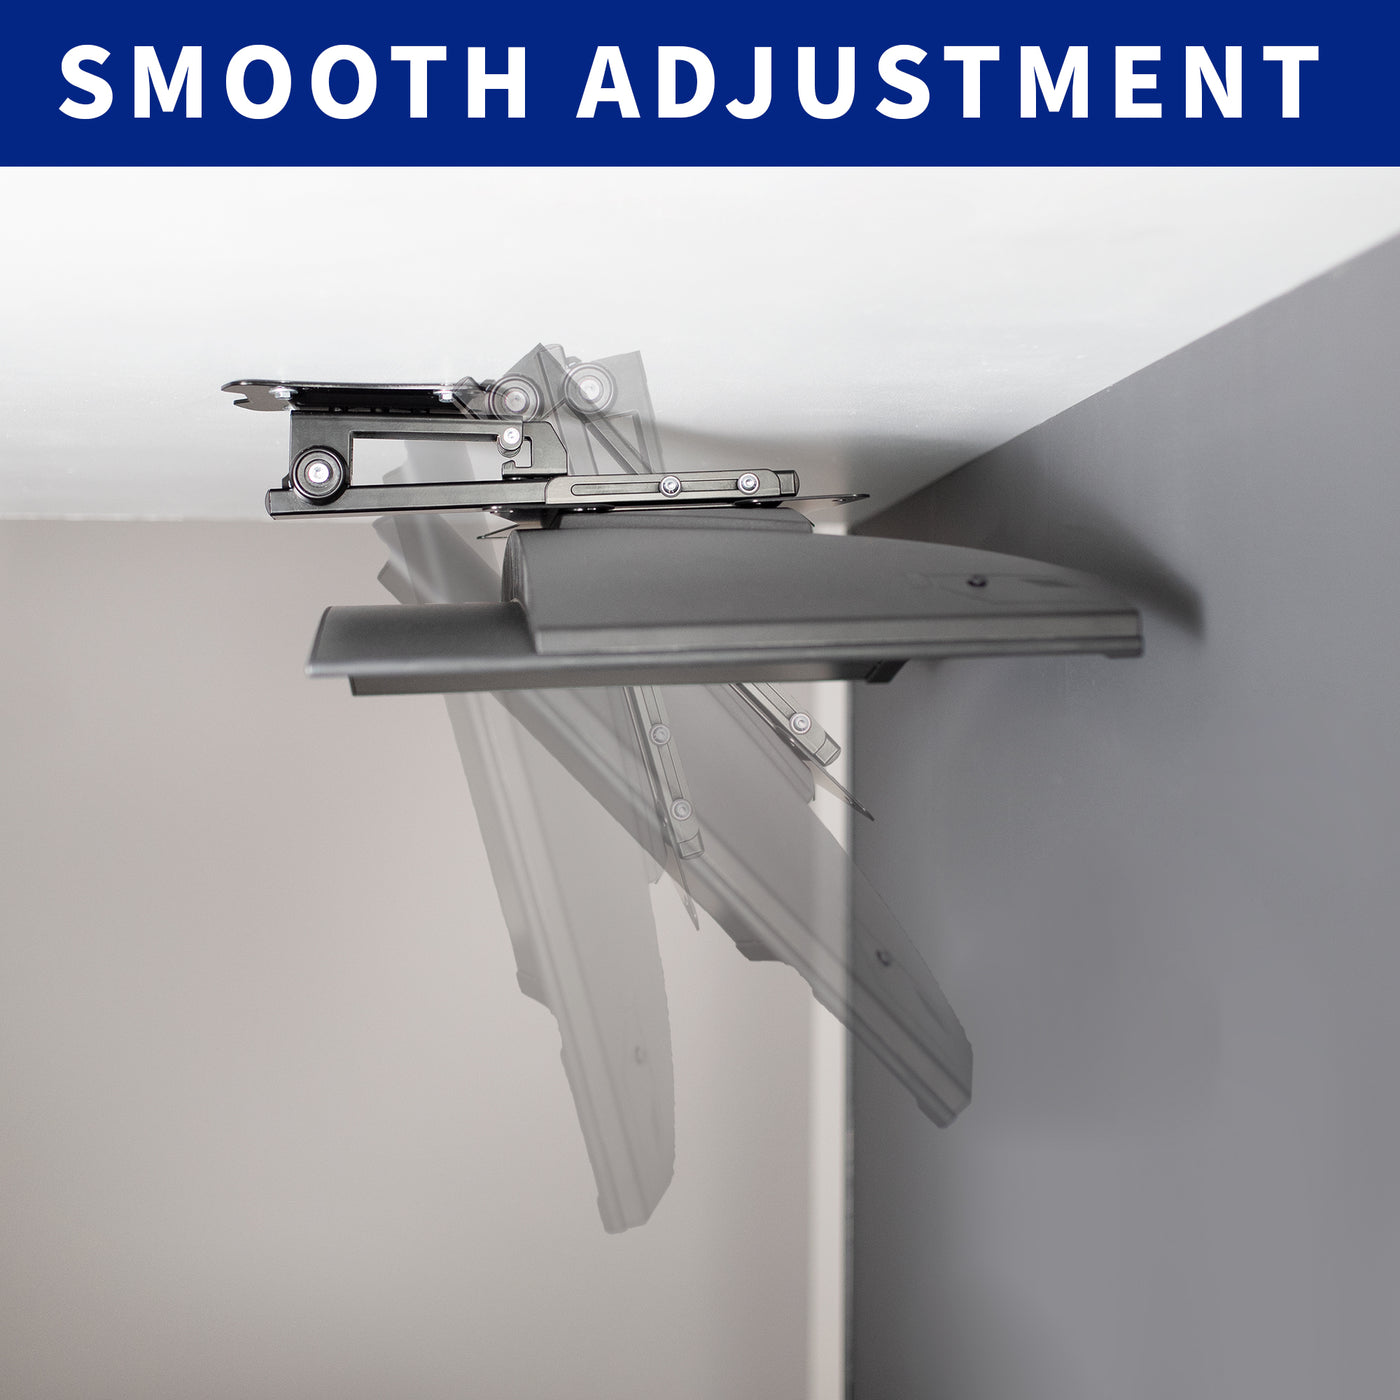 Smooth adjustments made easy with flip-down TV ceiling mount from VIVO.